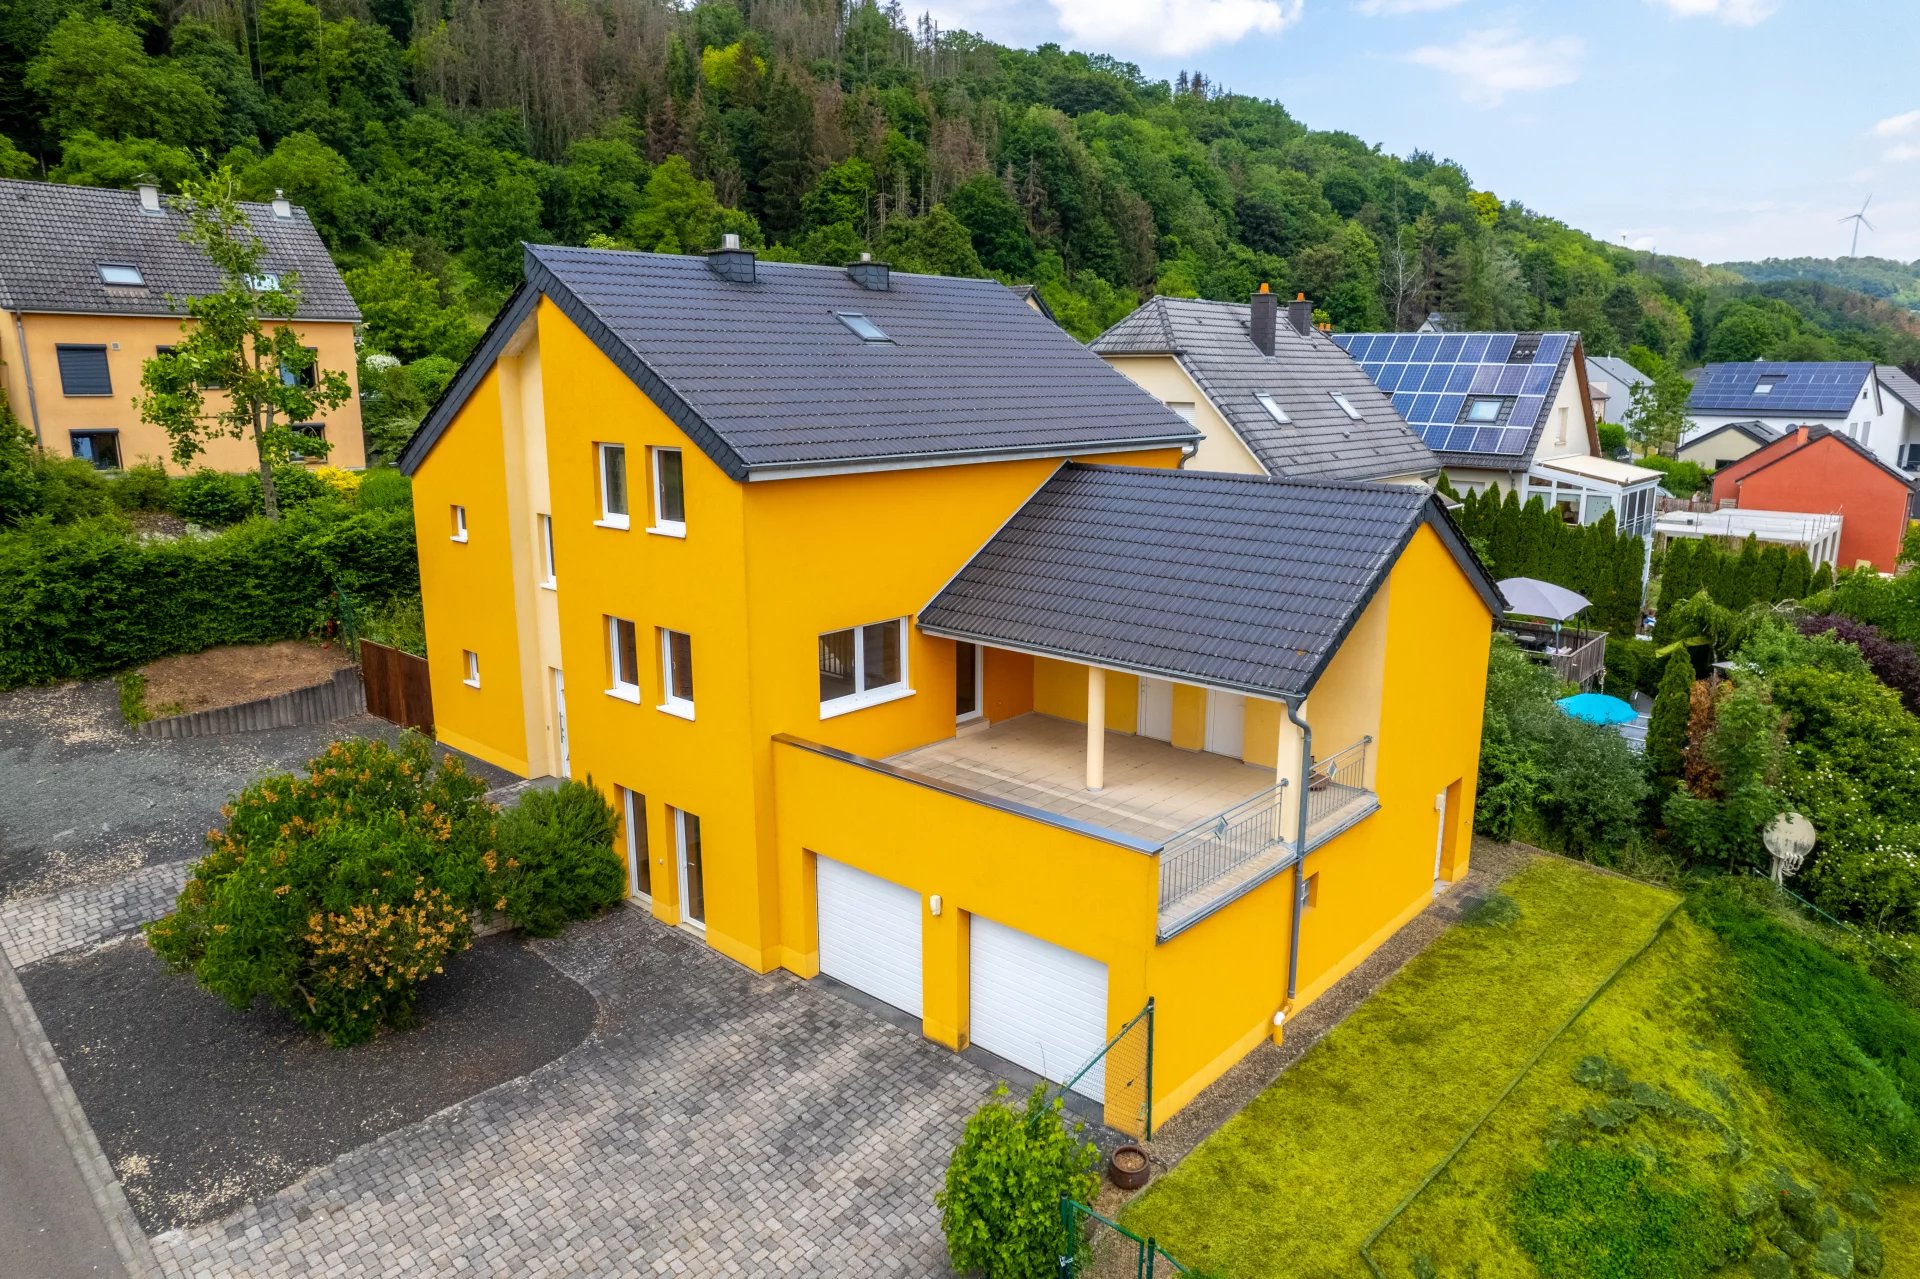 House with 5 bedroom and office for sale in Moersdorf